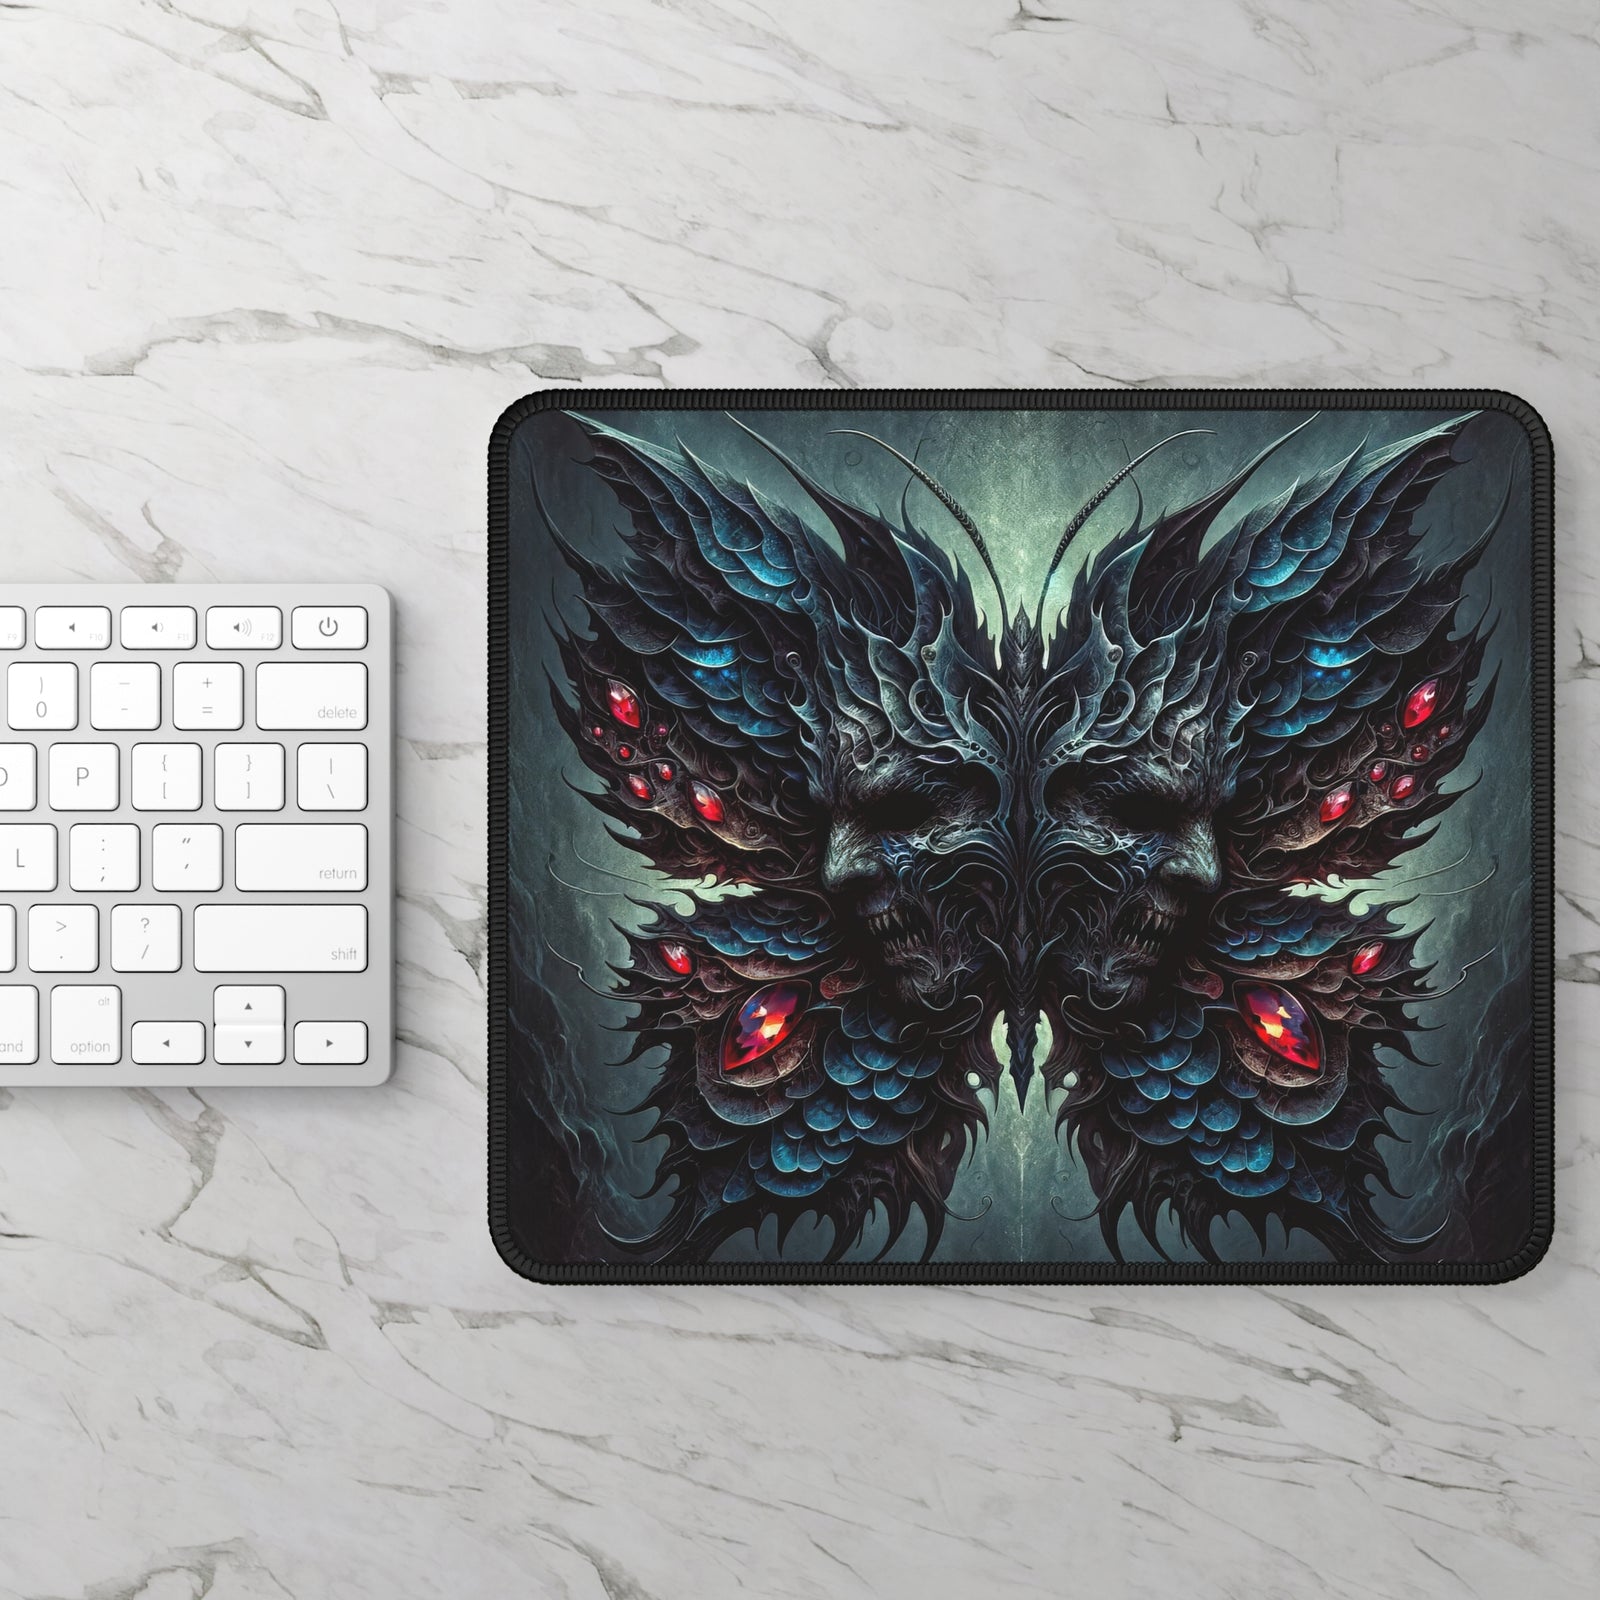 Veil of the Seraphim Mouse Pad